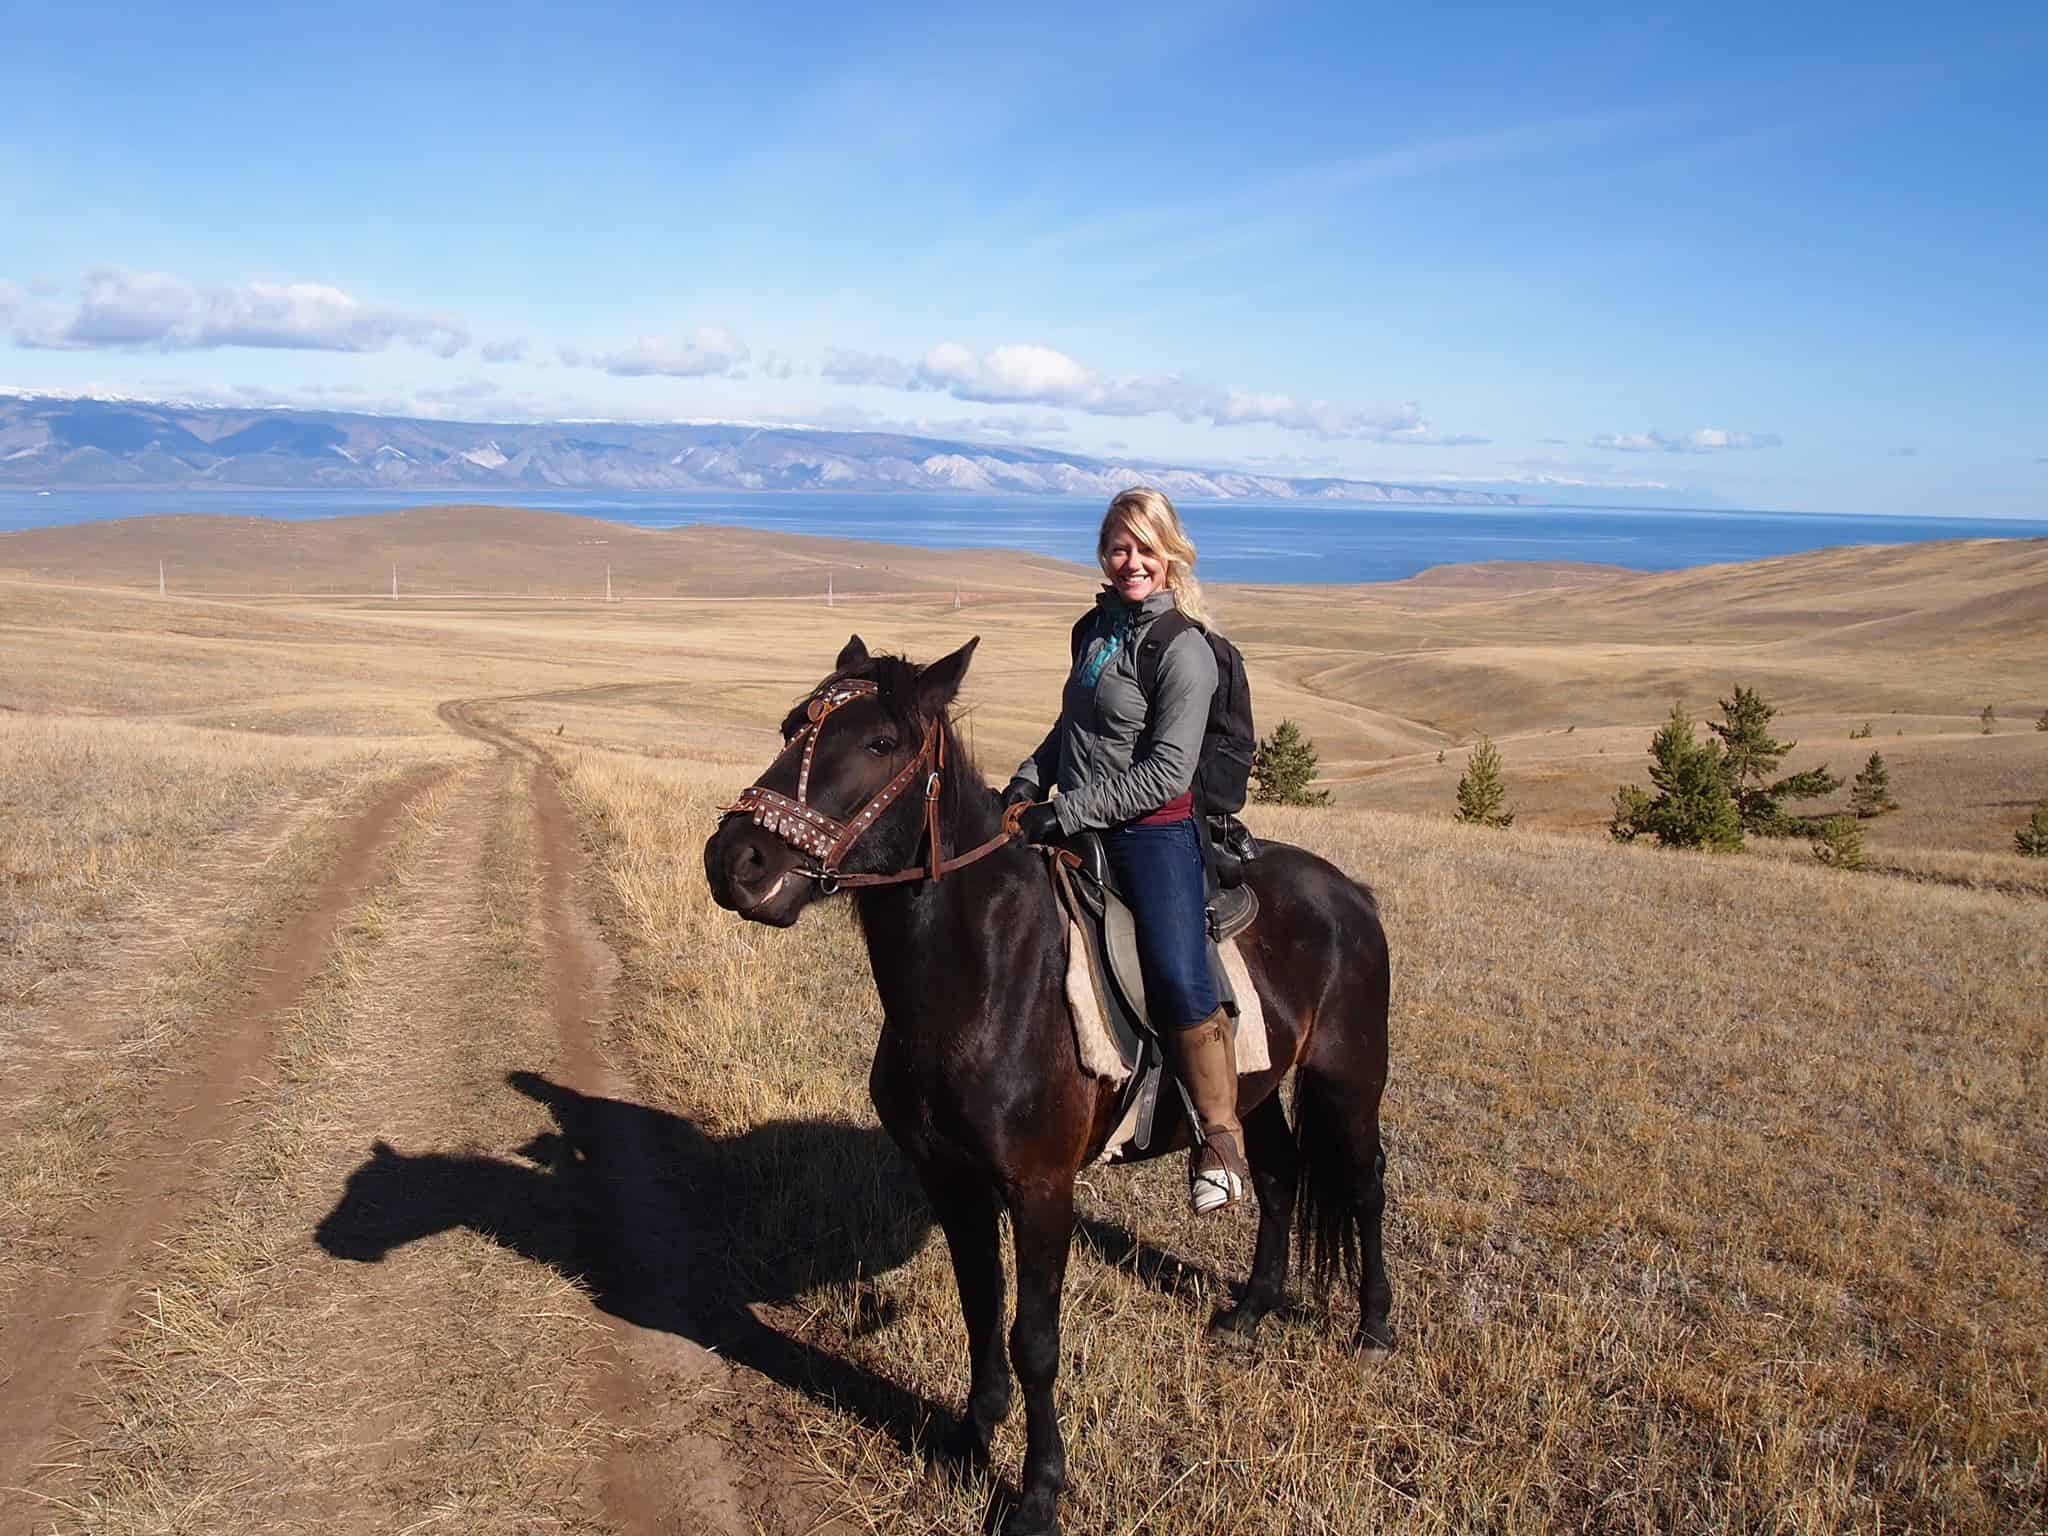 Girls Who Travel | Noraly Schoenmaker riding a horse